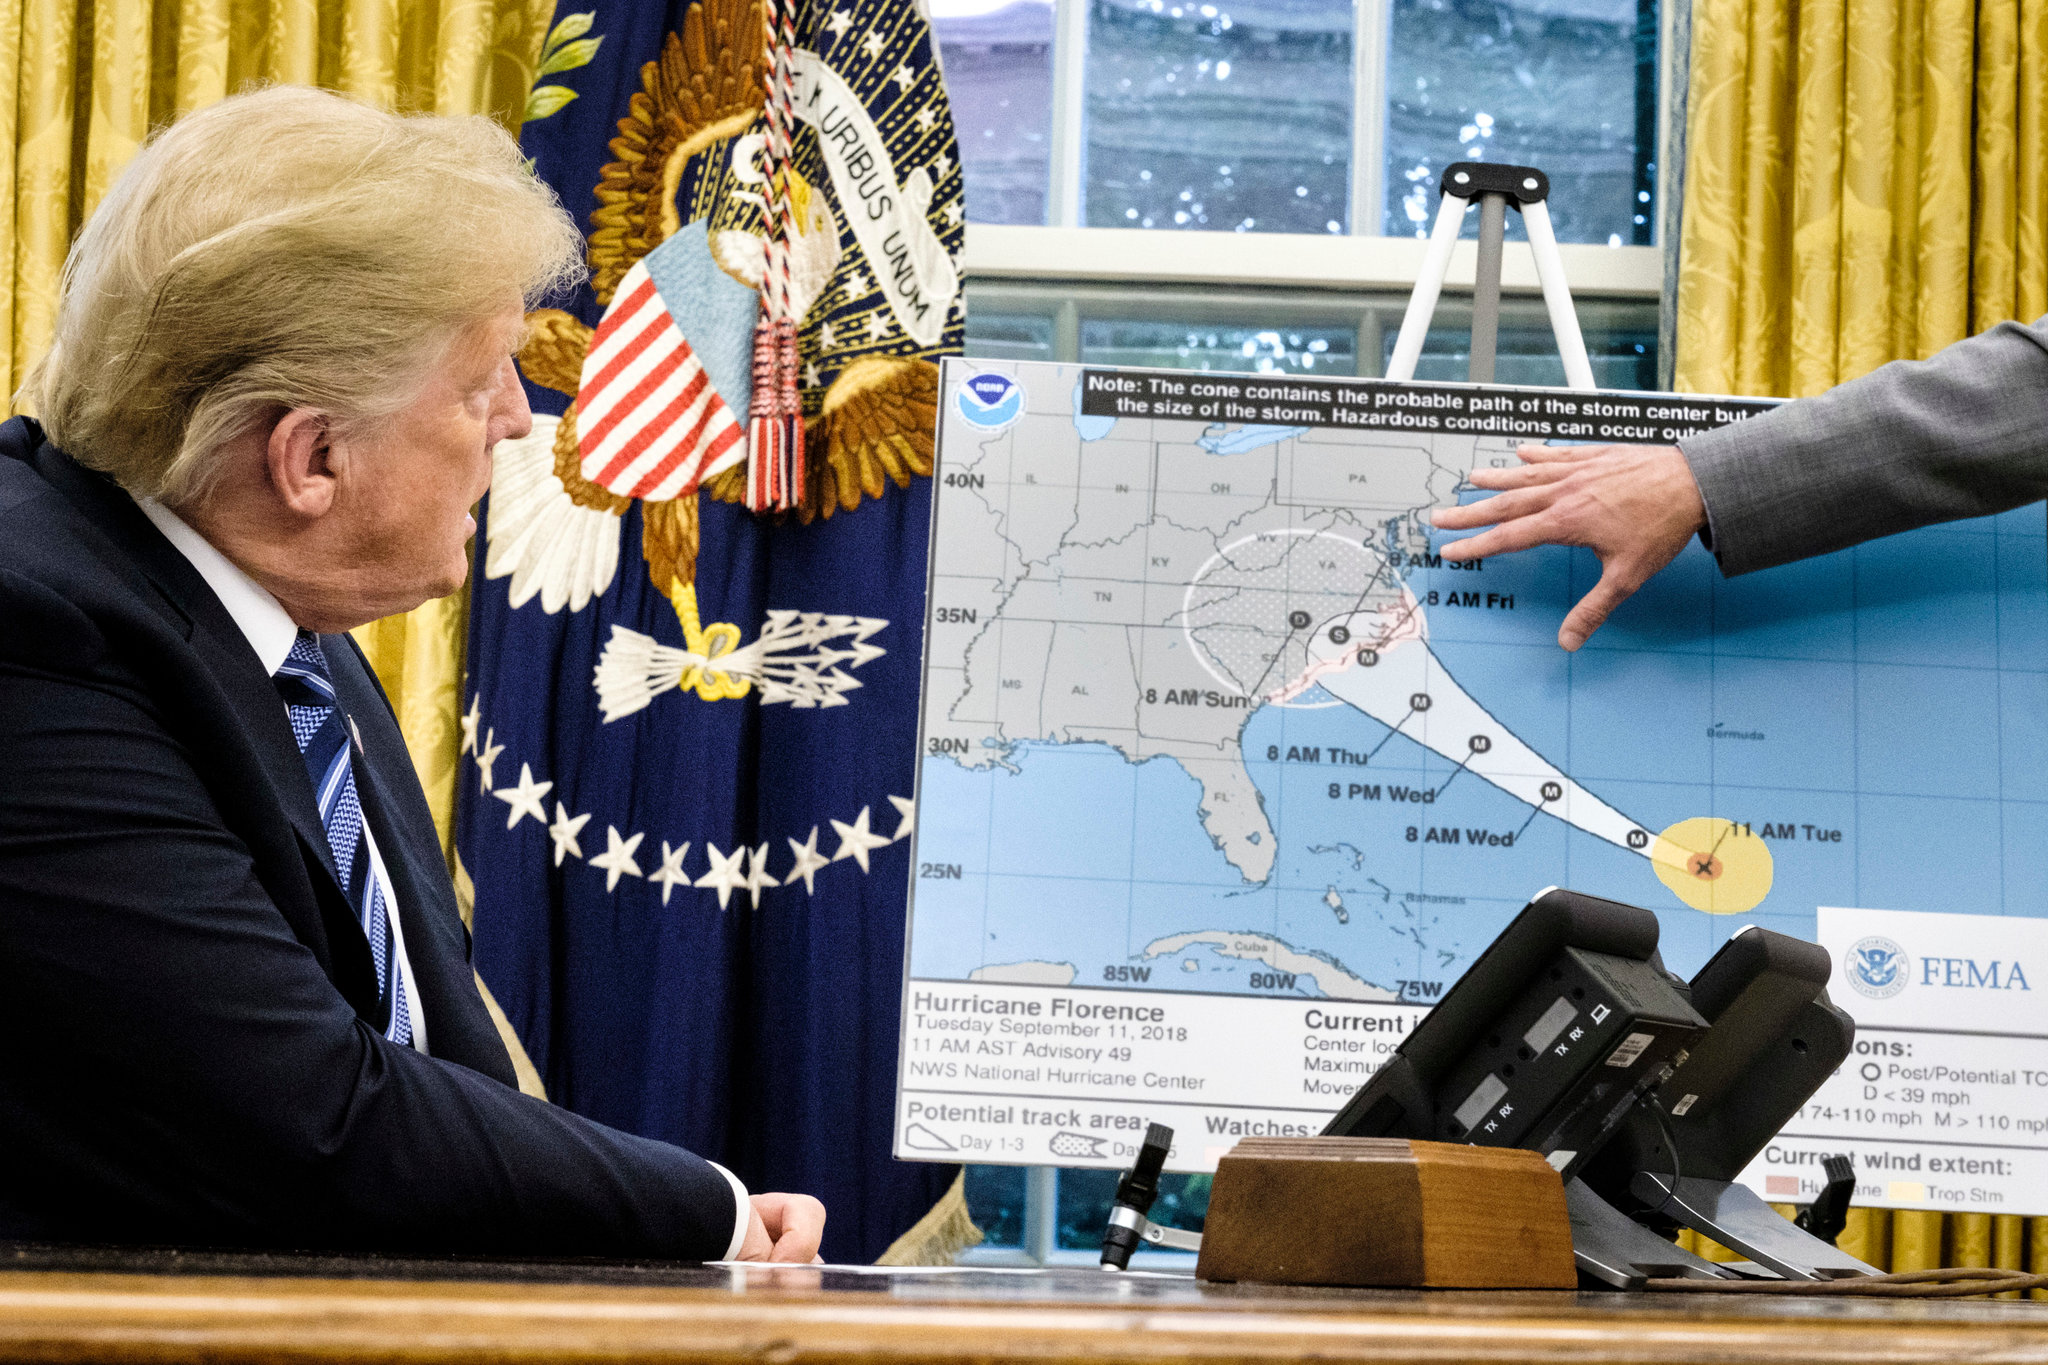 Figure 1: President Trump receiving a briefing from FEMA regarding the projected path of Hurricane Florence